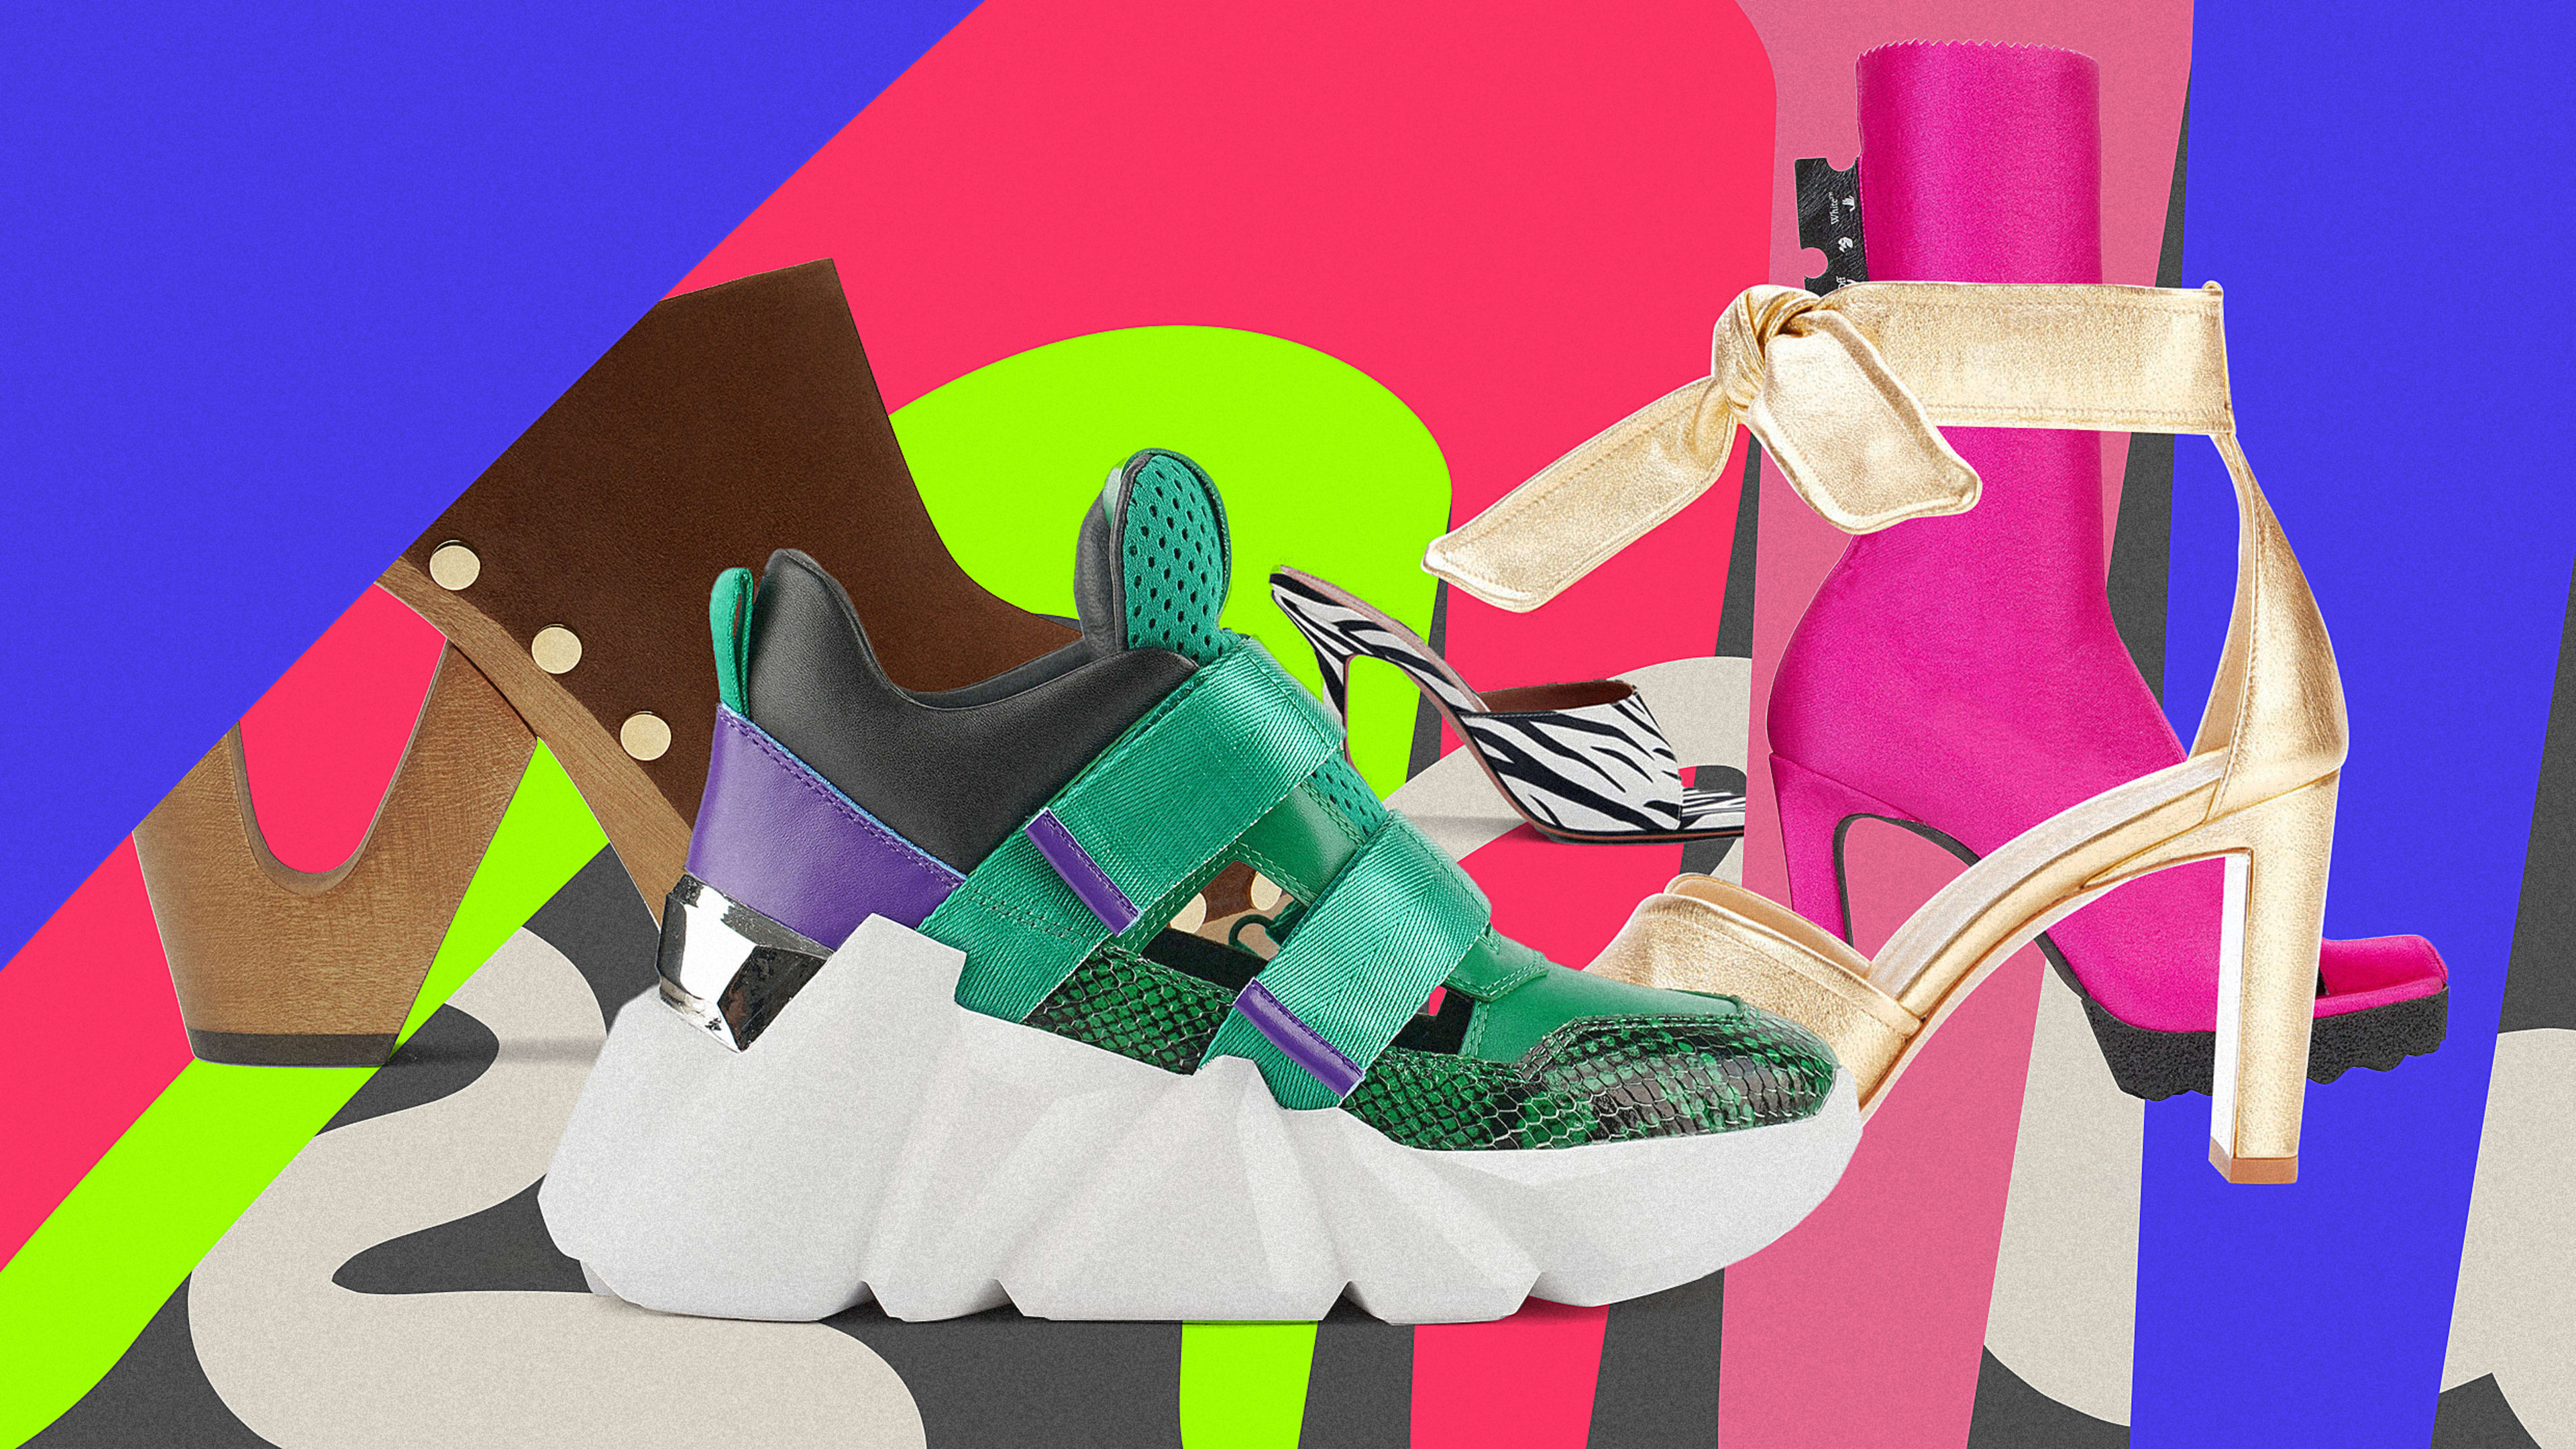 Heels are making a post-pandemic comeback. Here are 5 fabulous pairs